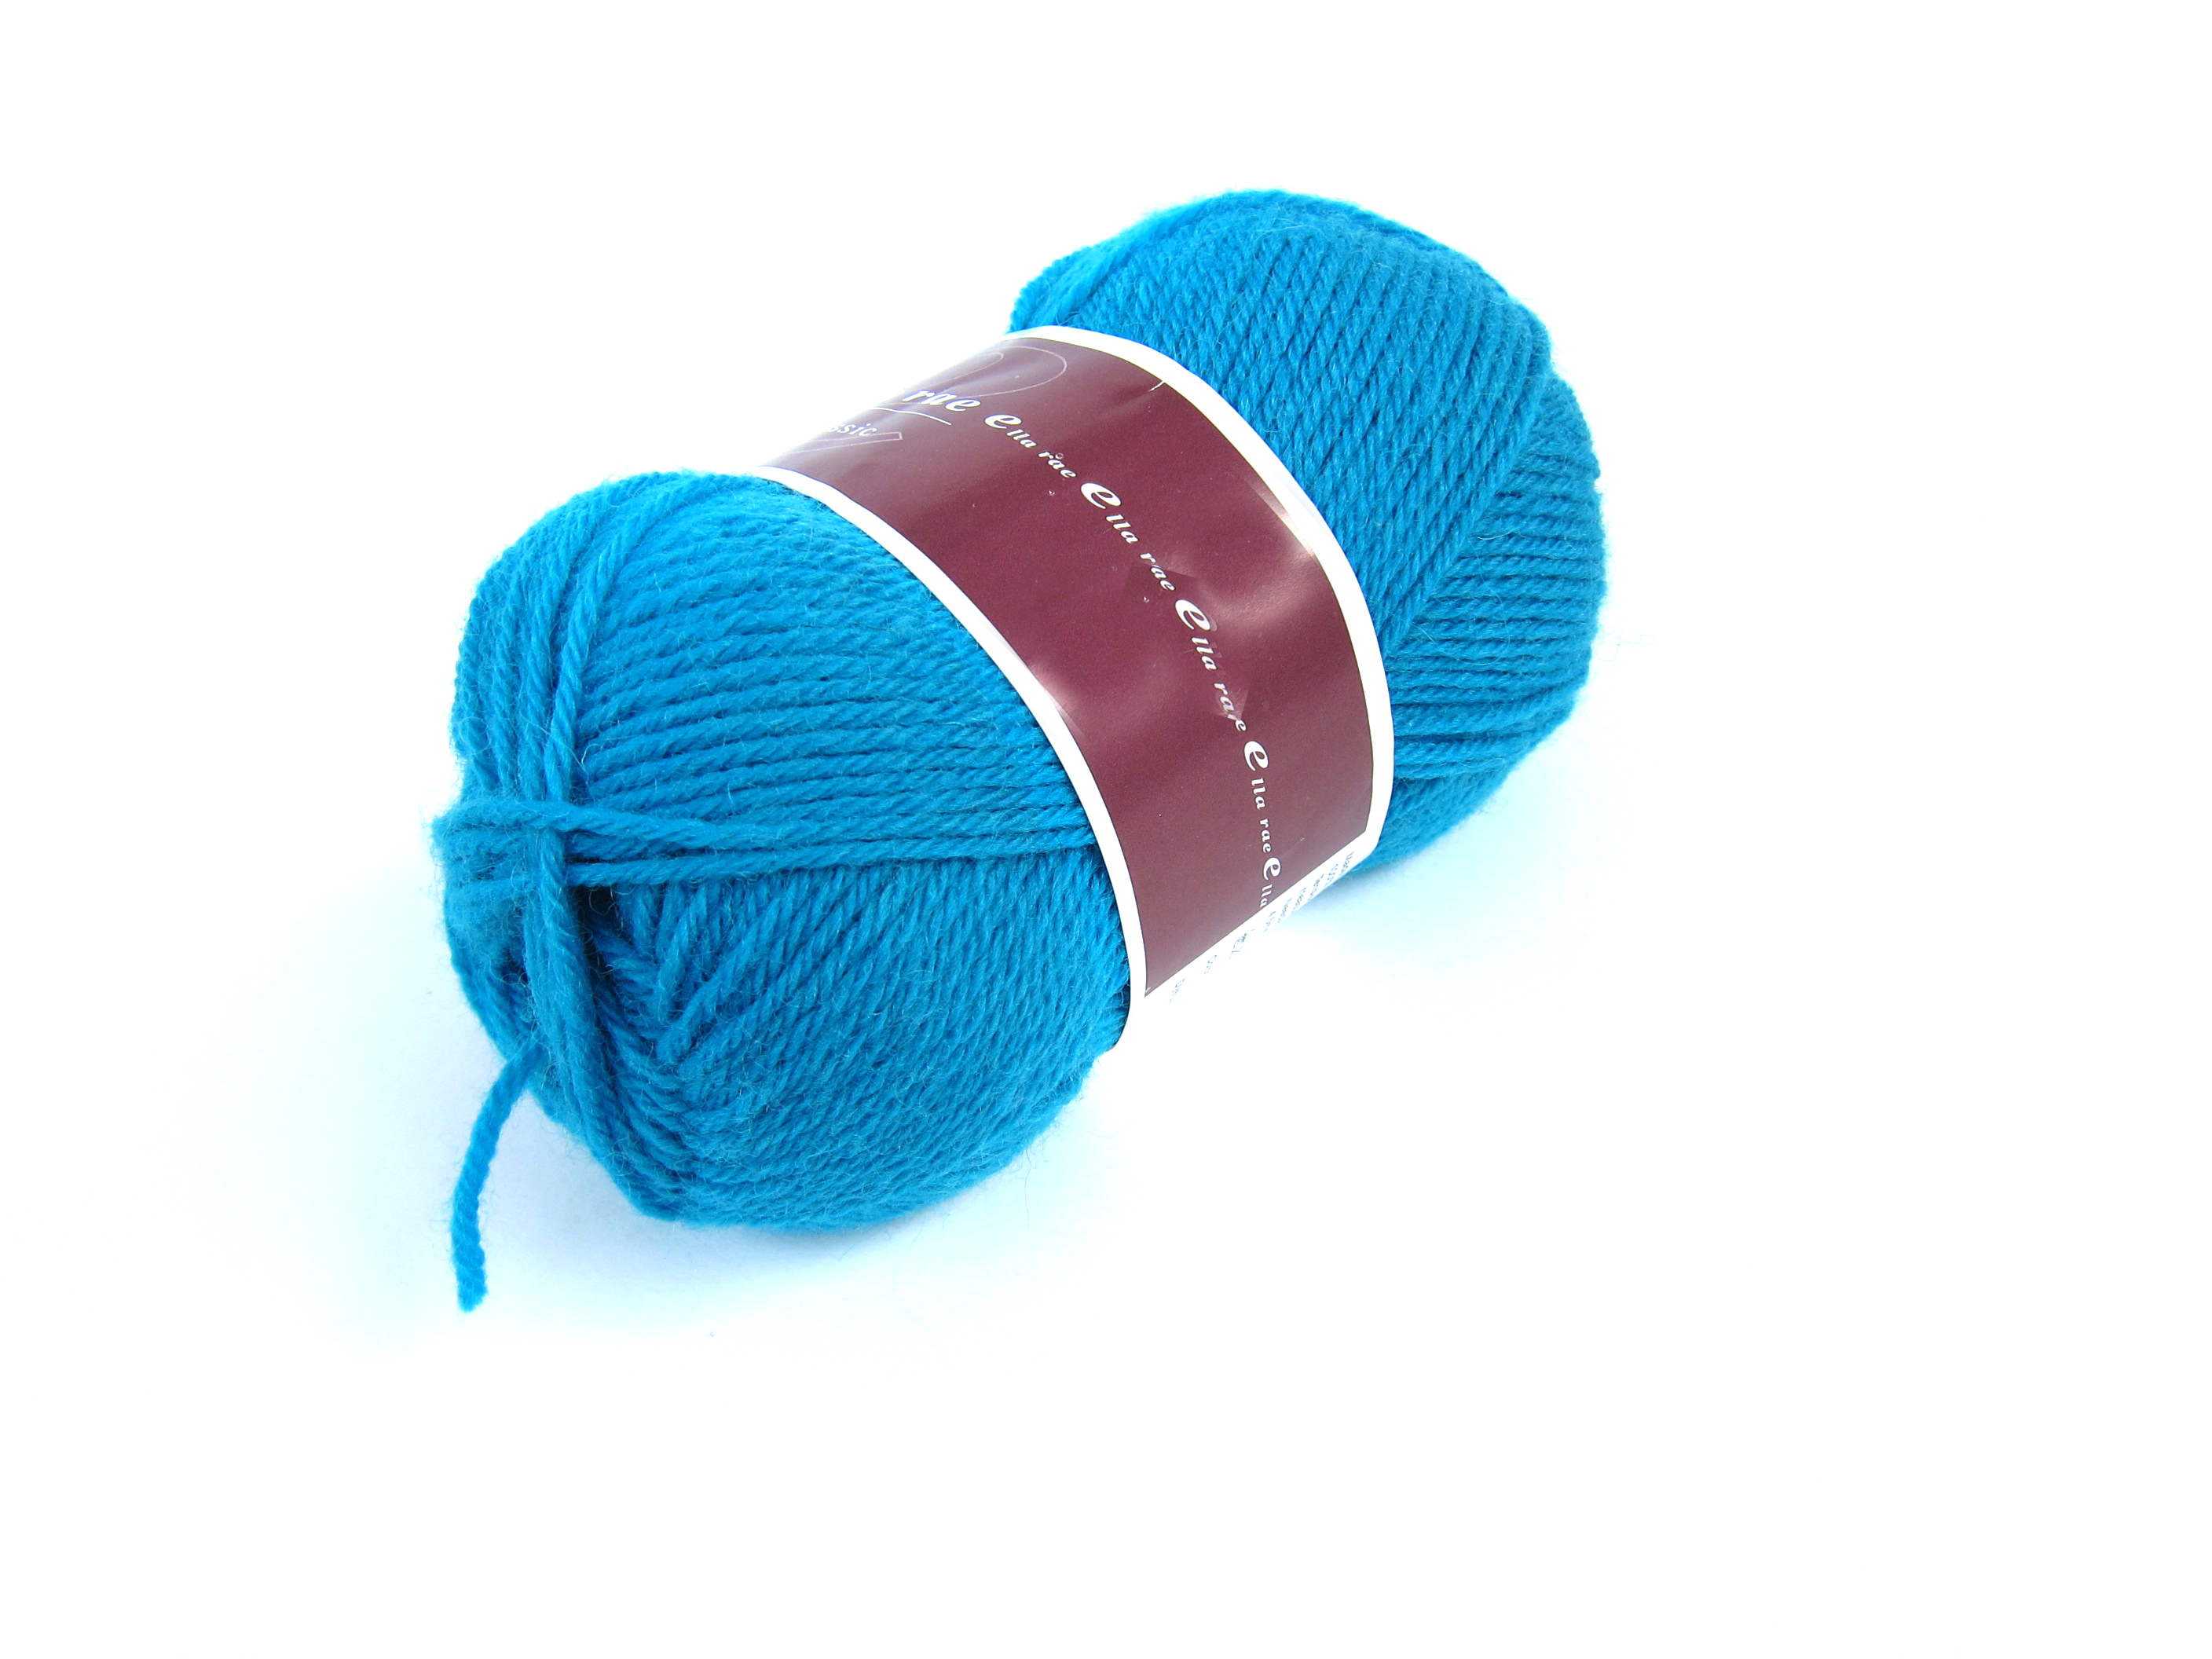 What is a skein? Demystifying names for yarn bundles. | Shiny Happy ...